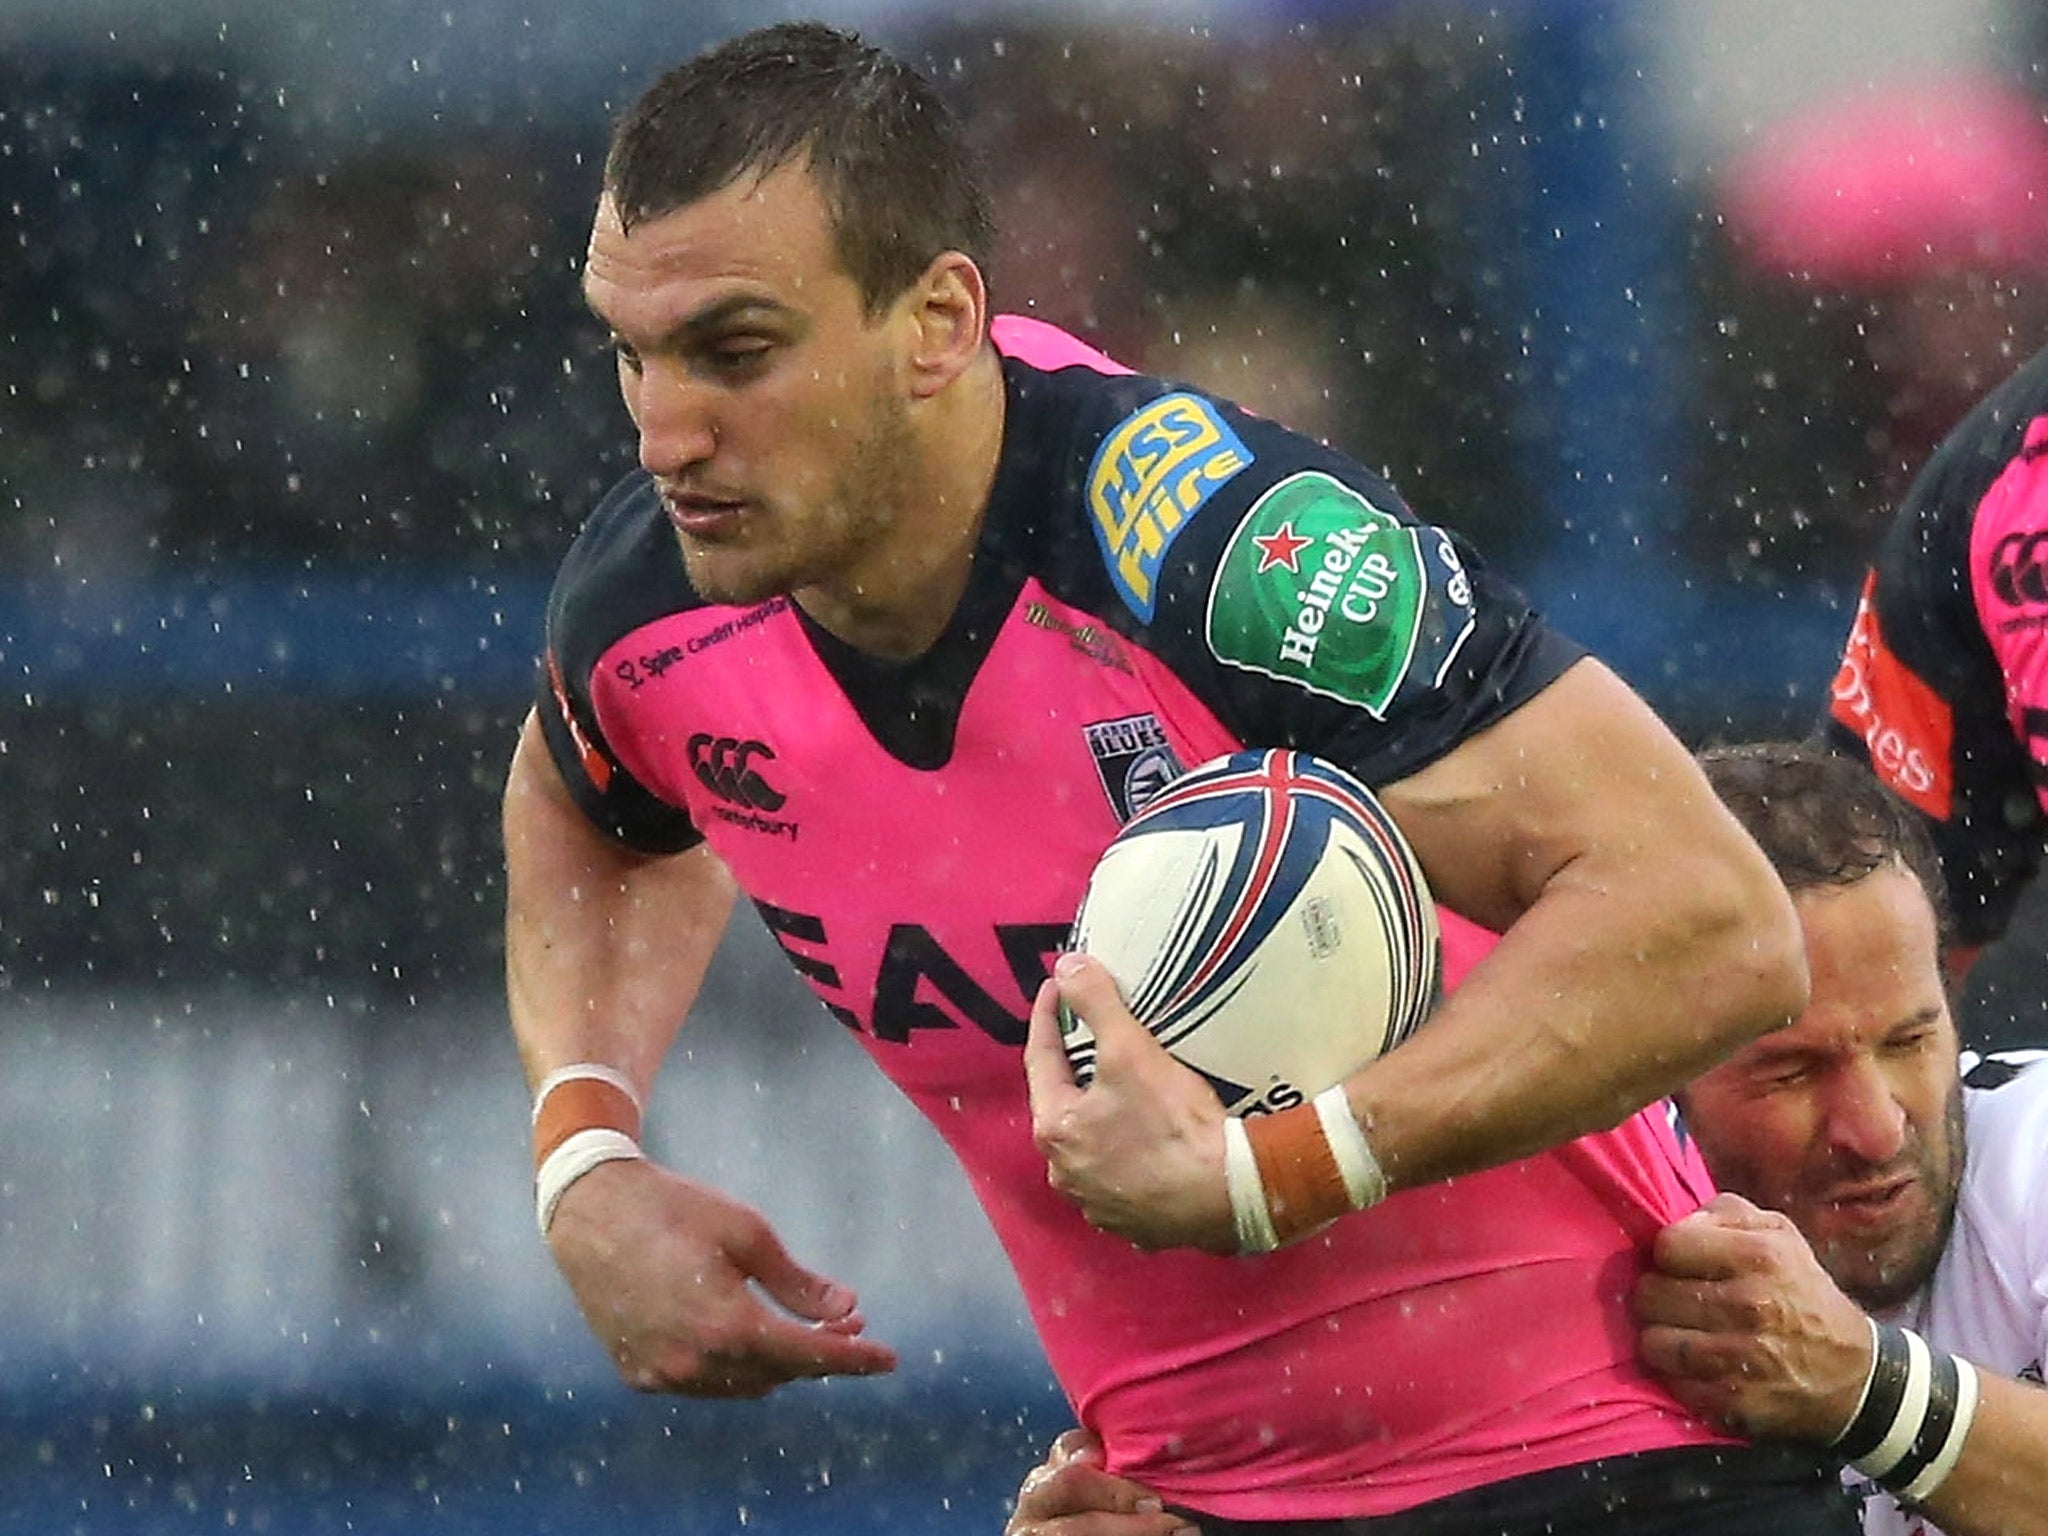 Sam Warburton is set to play for Cardiff Blues in a Pro 12 match against Glasgow on Saturday